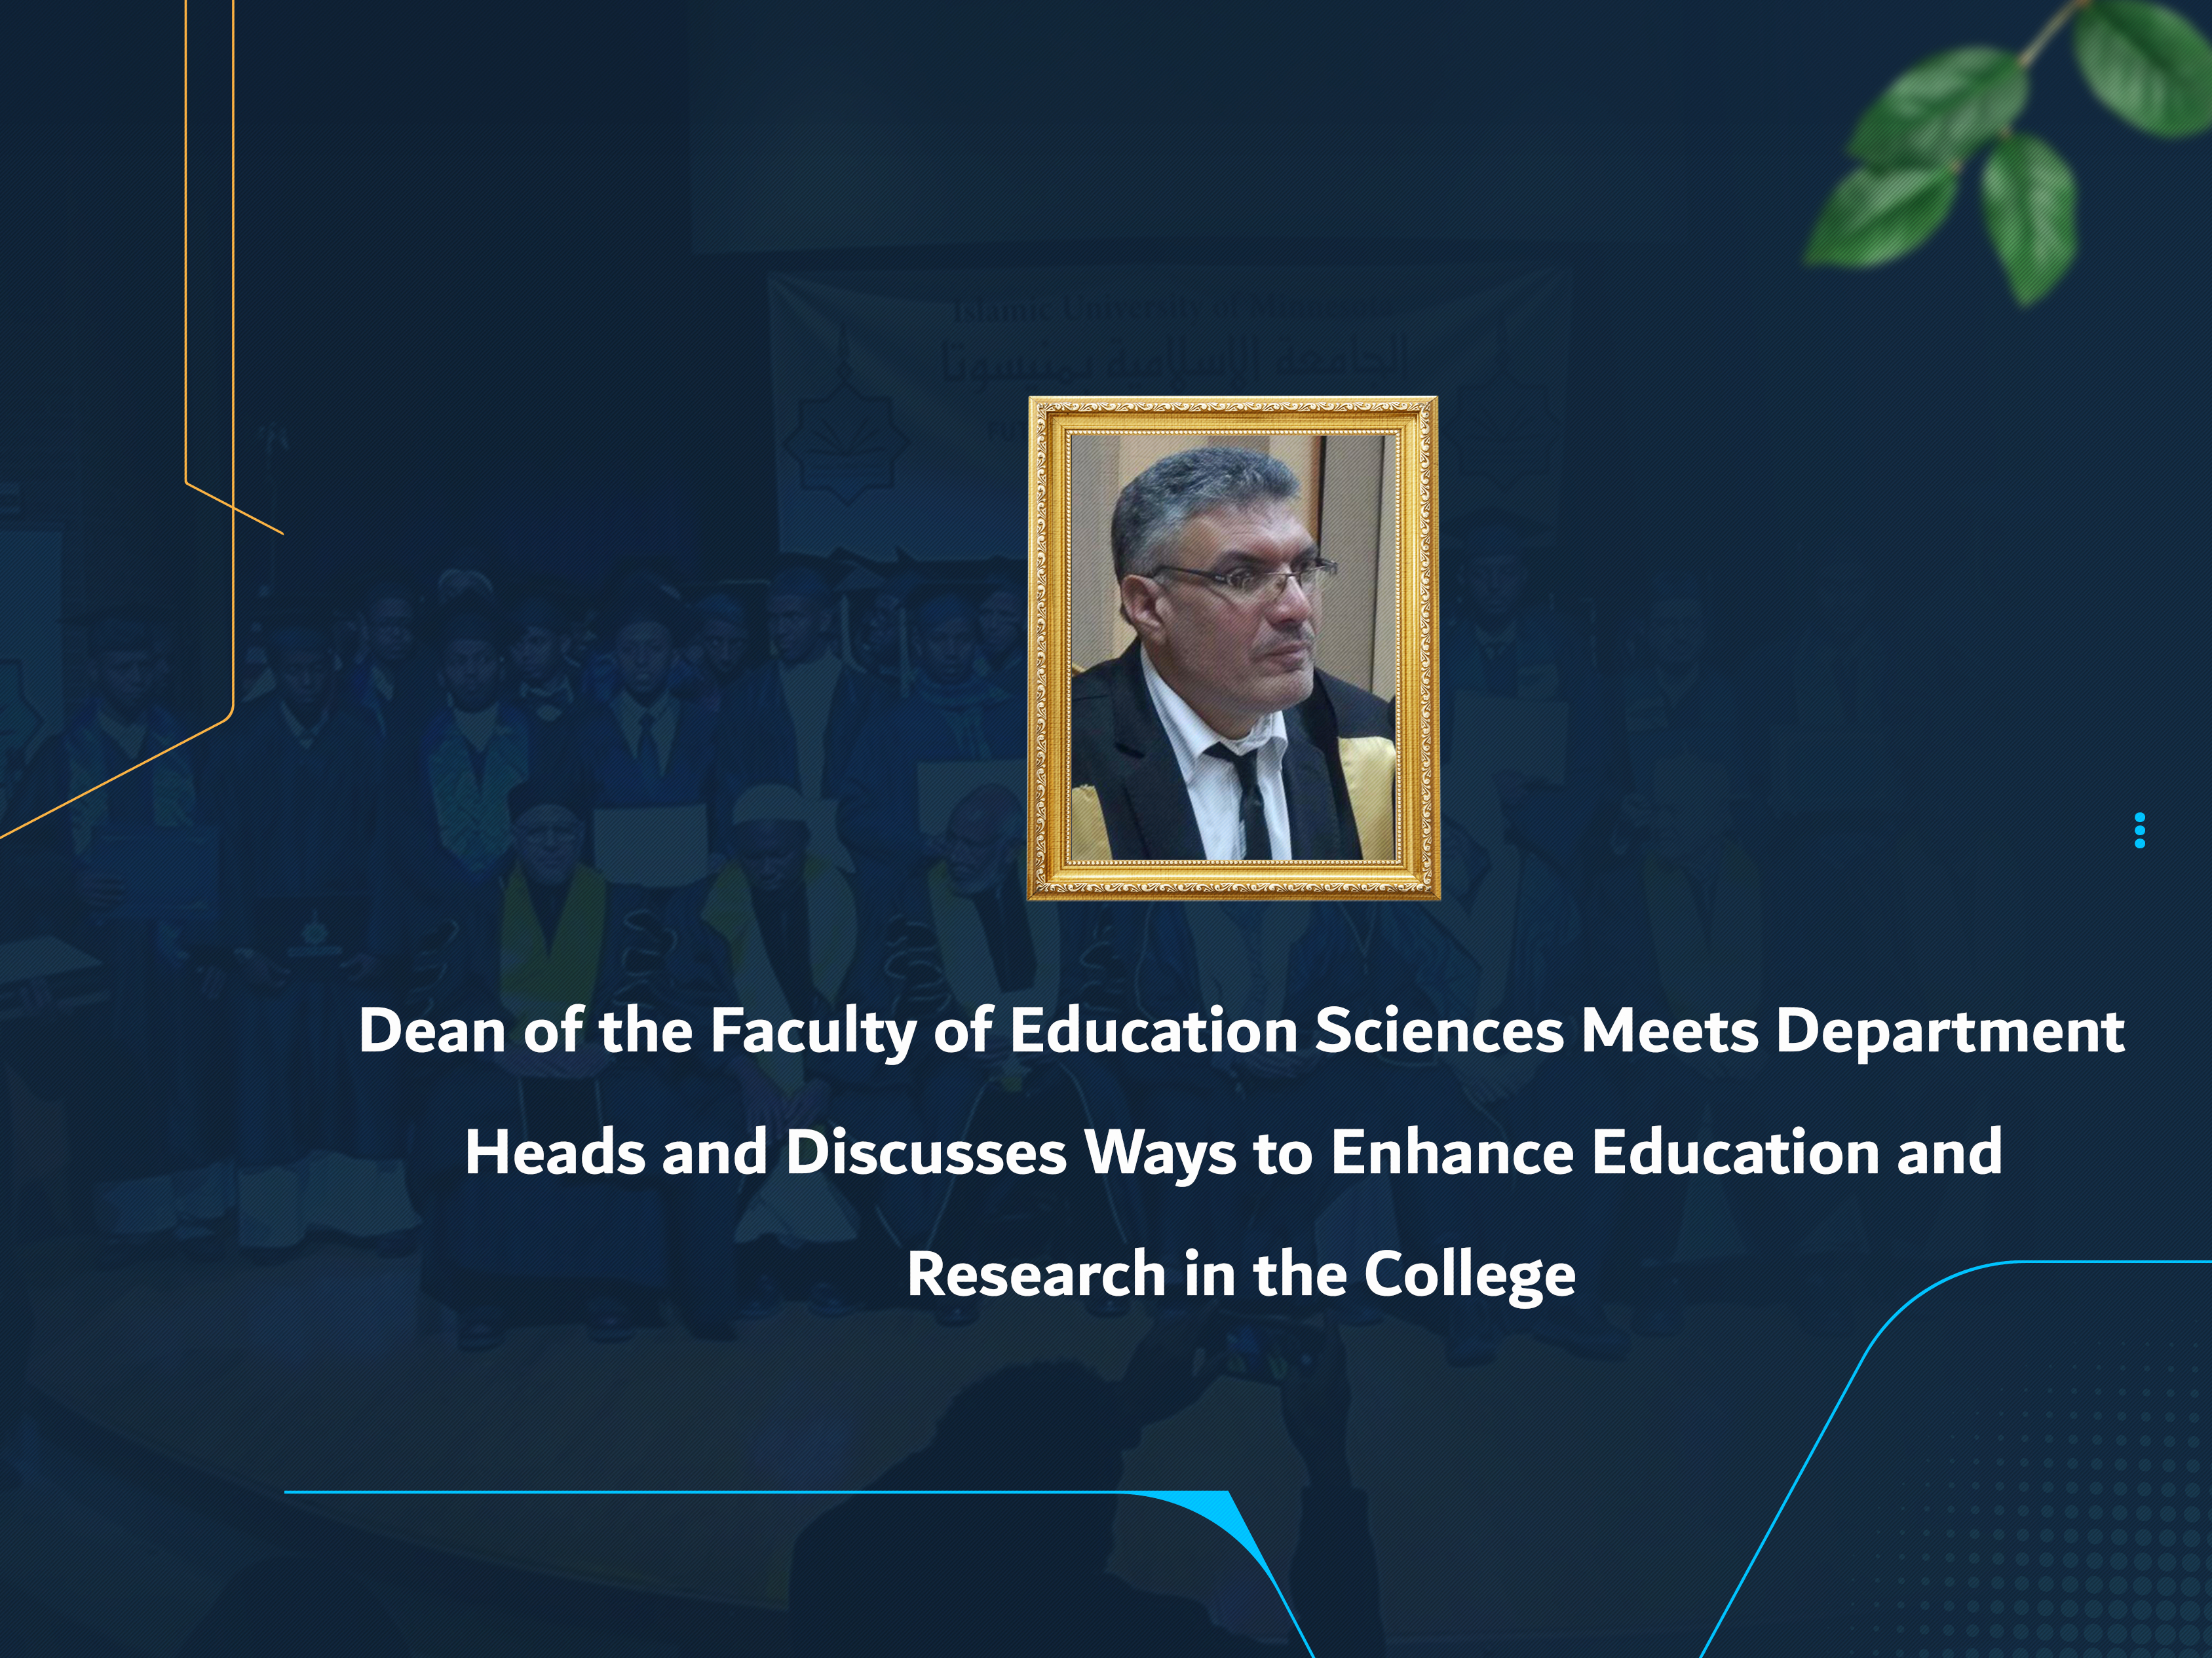 Dean of the Faculty of Education Sciences Meets Department Heads and Discusses Ways to Enhance Education and Research in the College